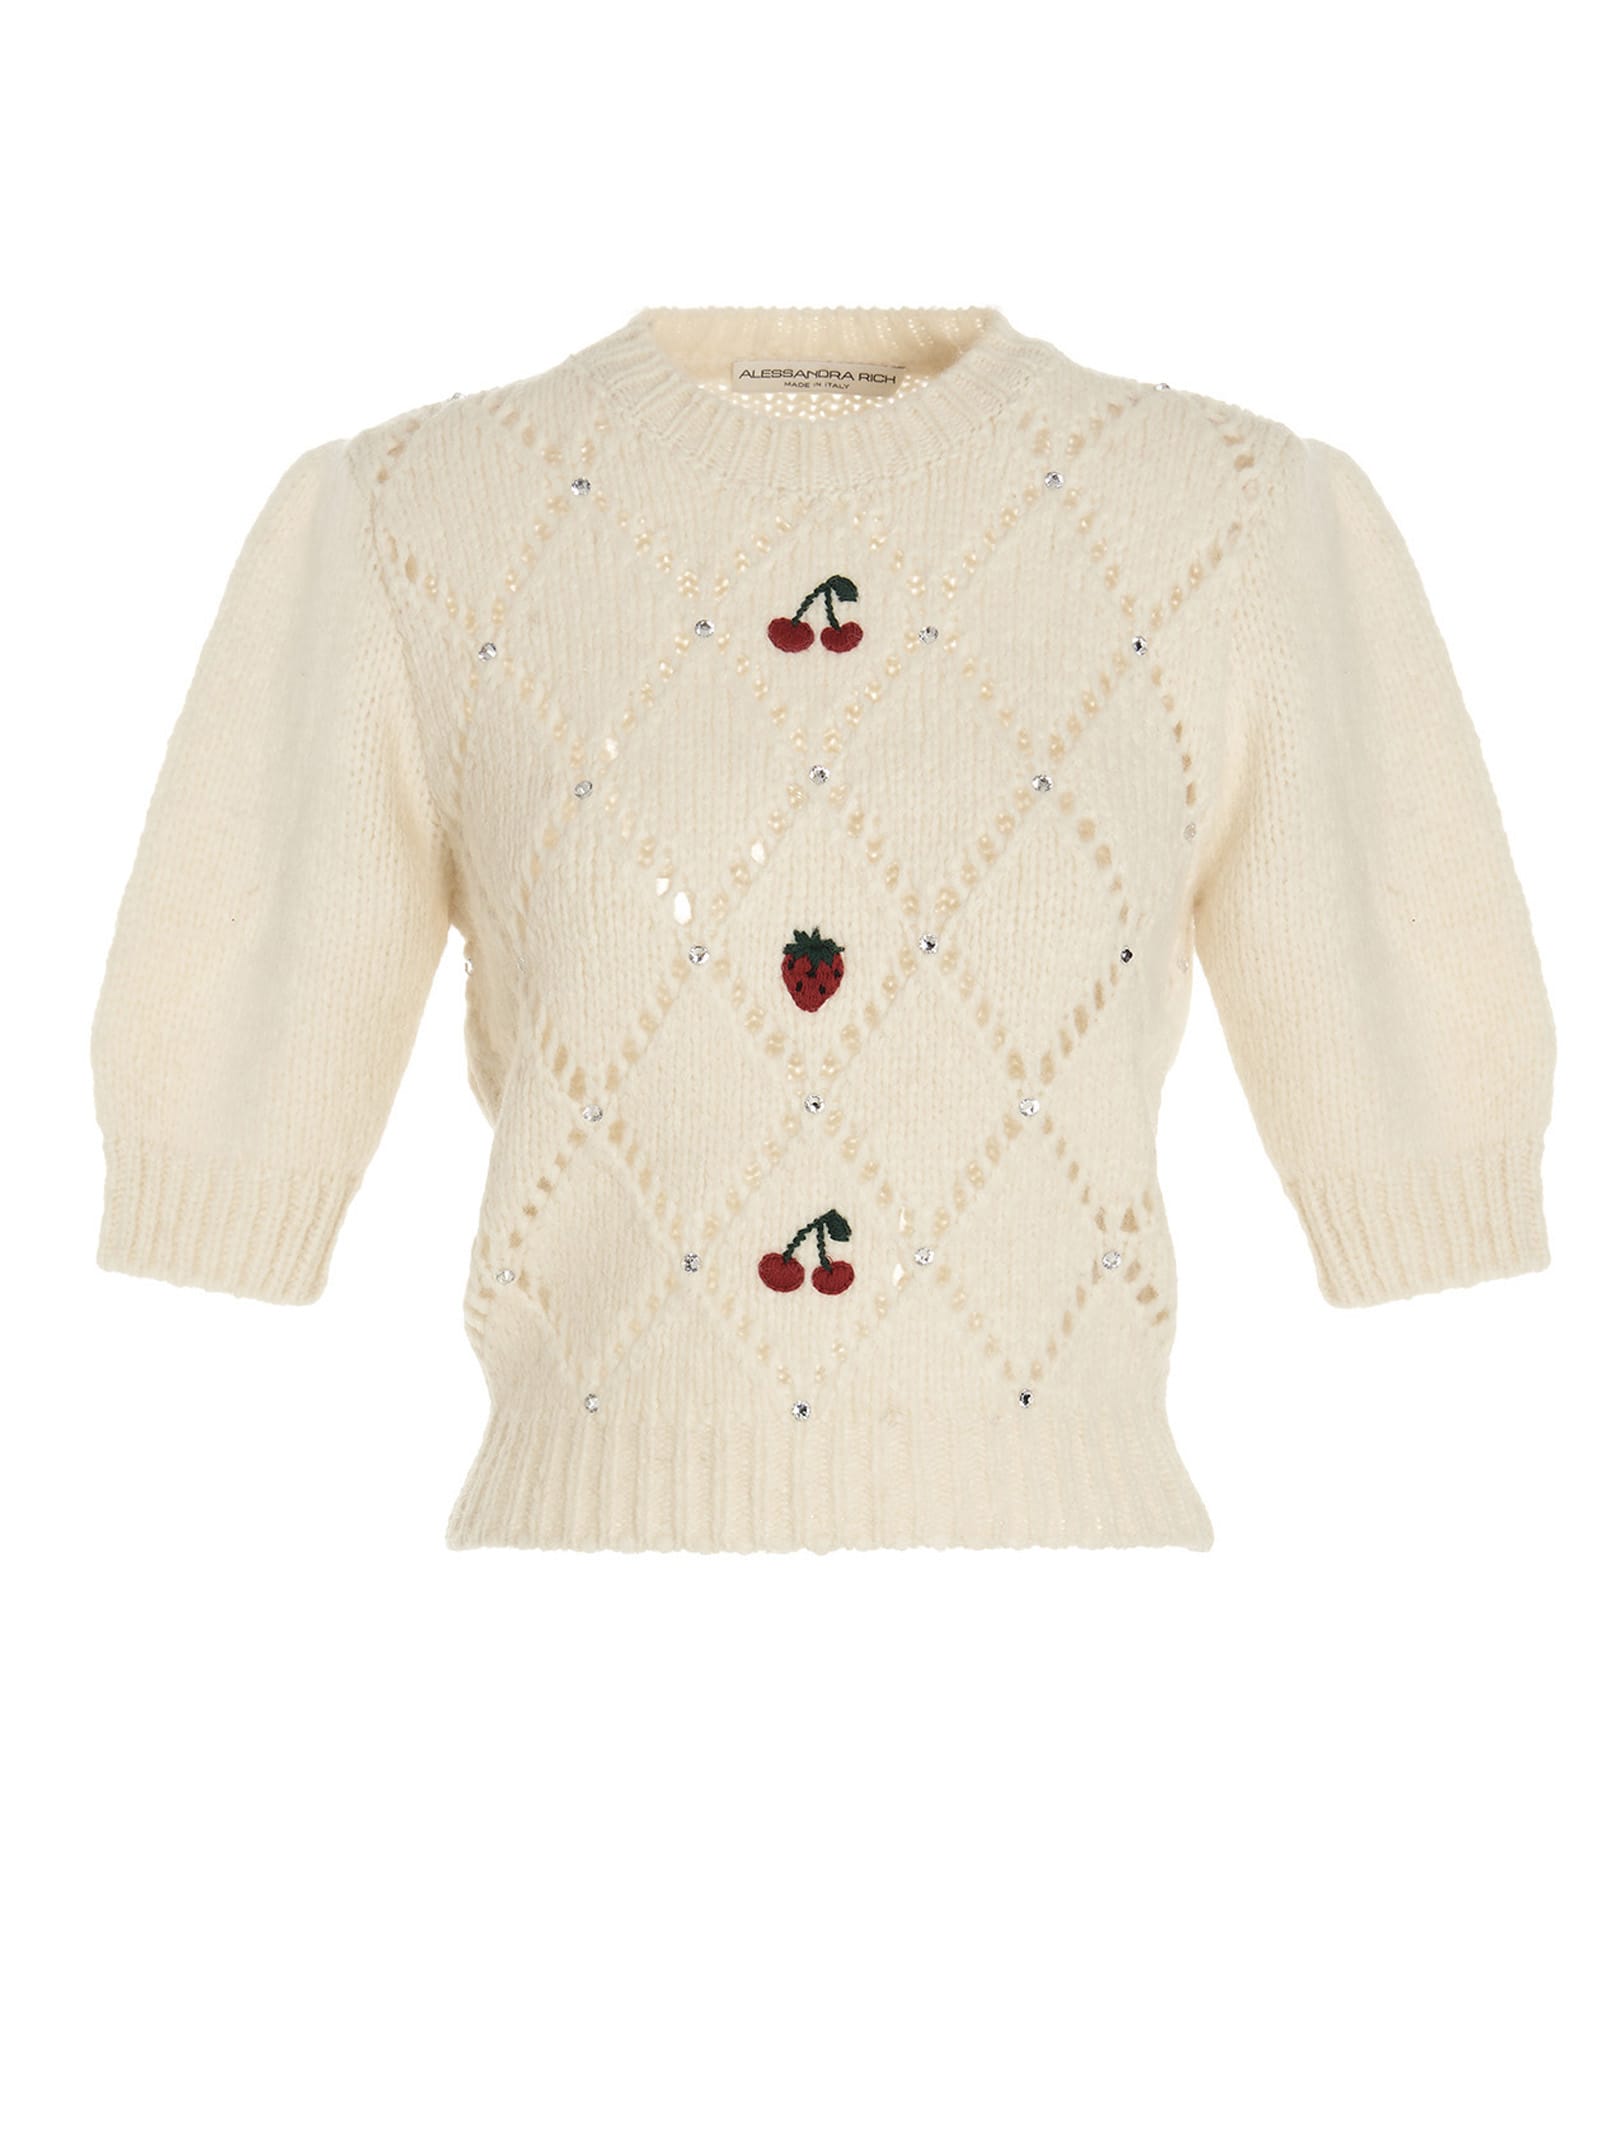 Alessandra Rich Sequin Fruit Embroidery Sweater